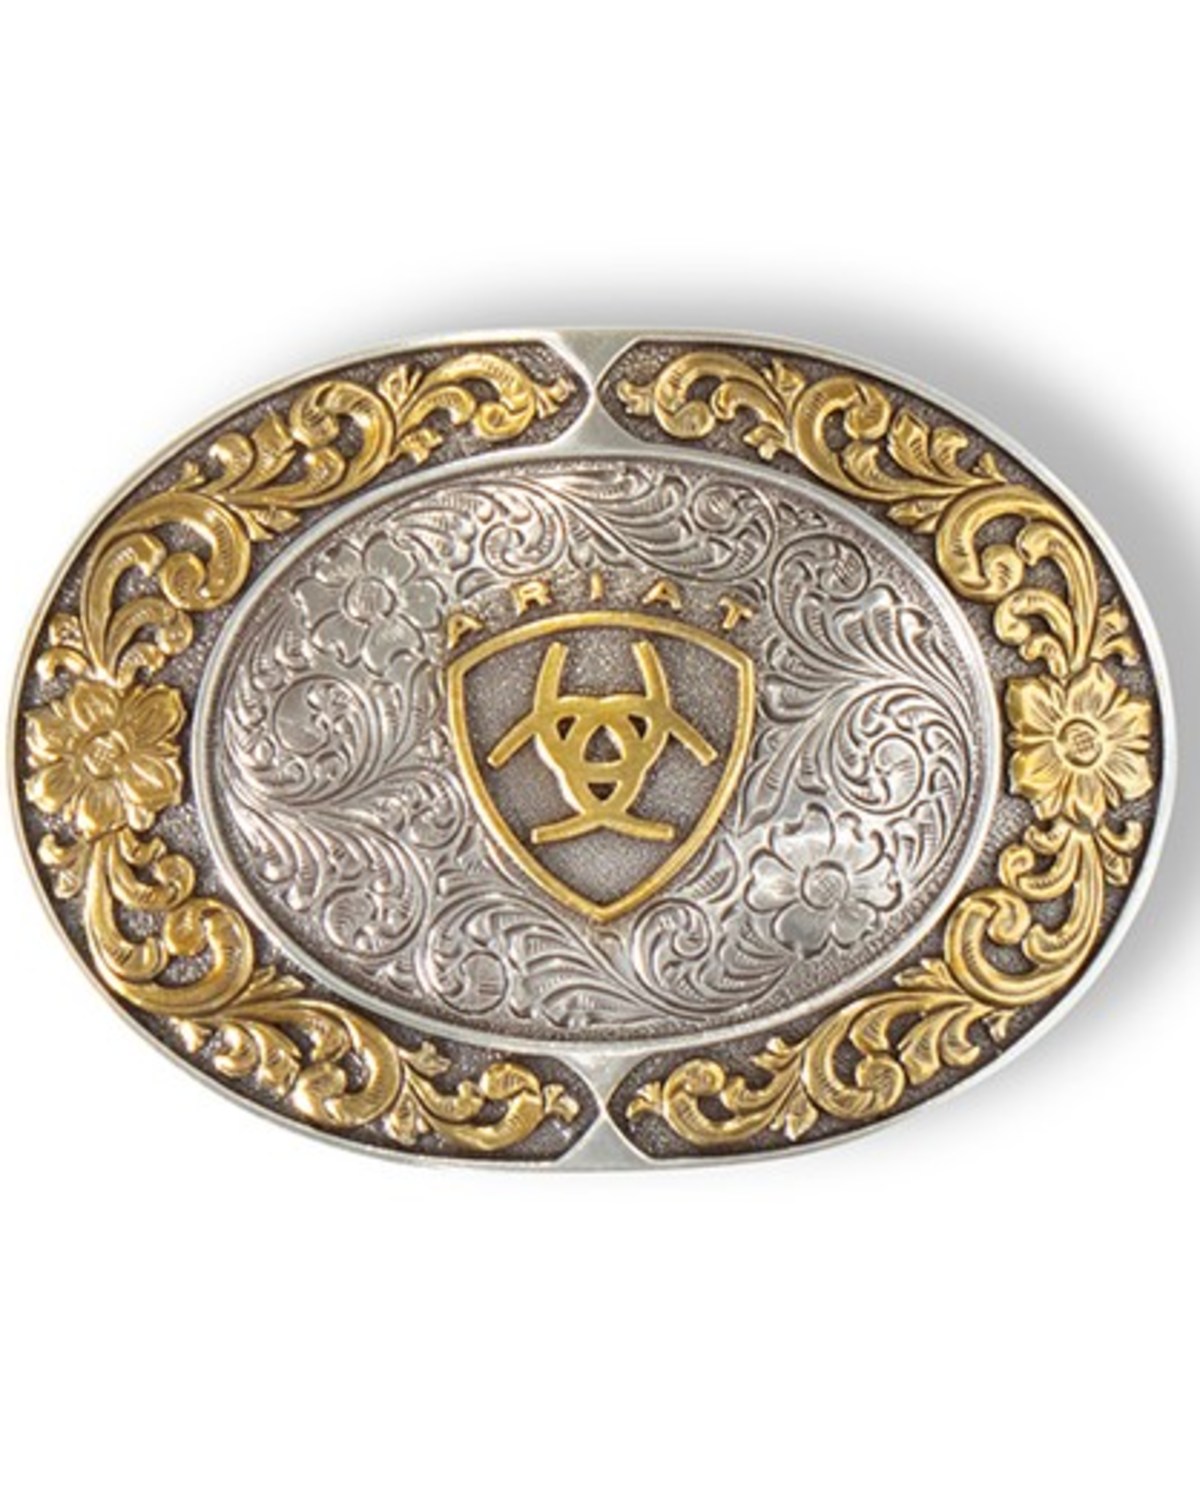 Ariat Women's Floral Smooth Edge Oval Belt Buckle